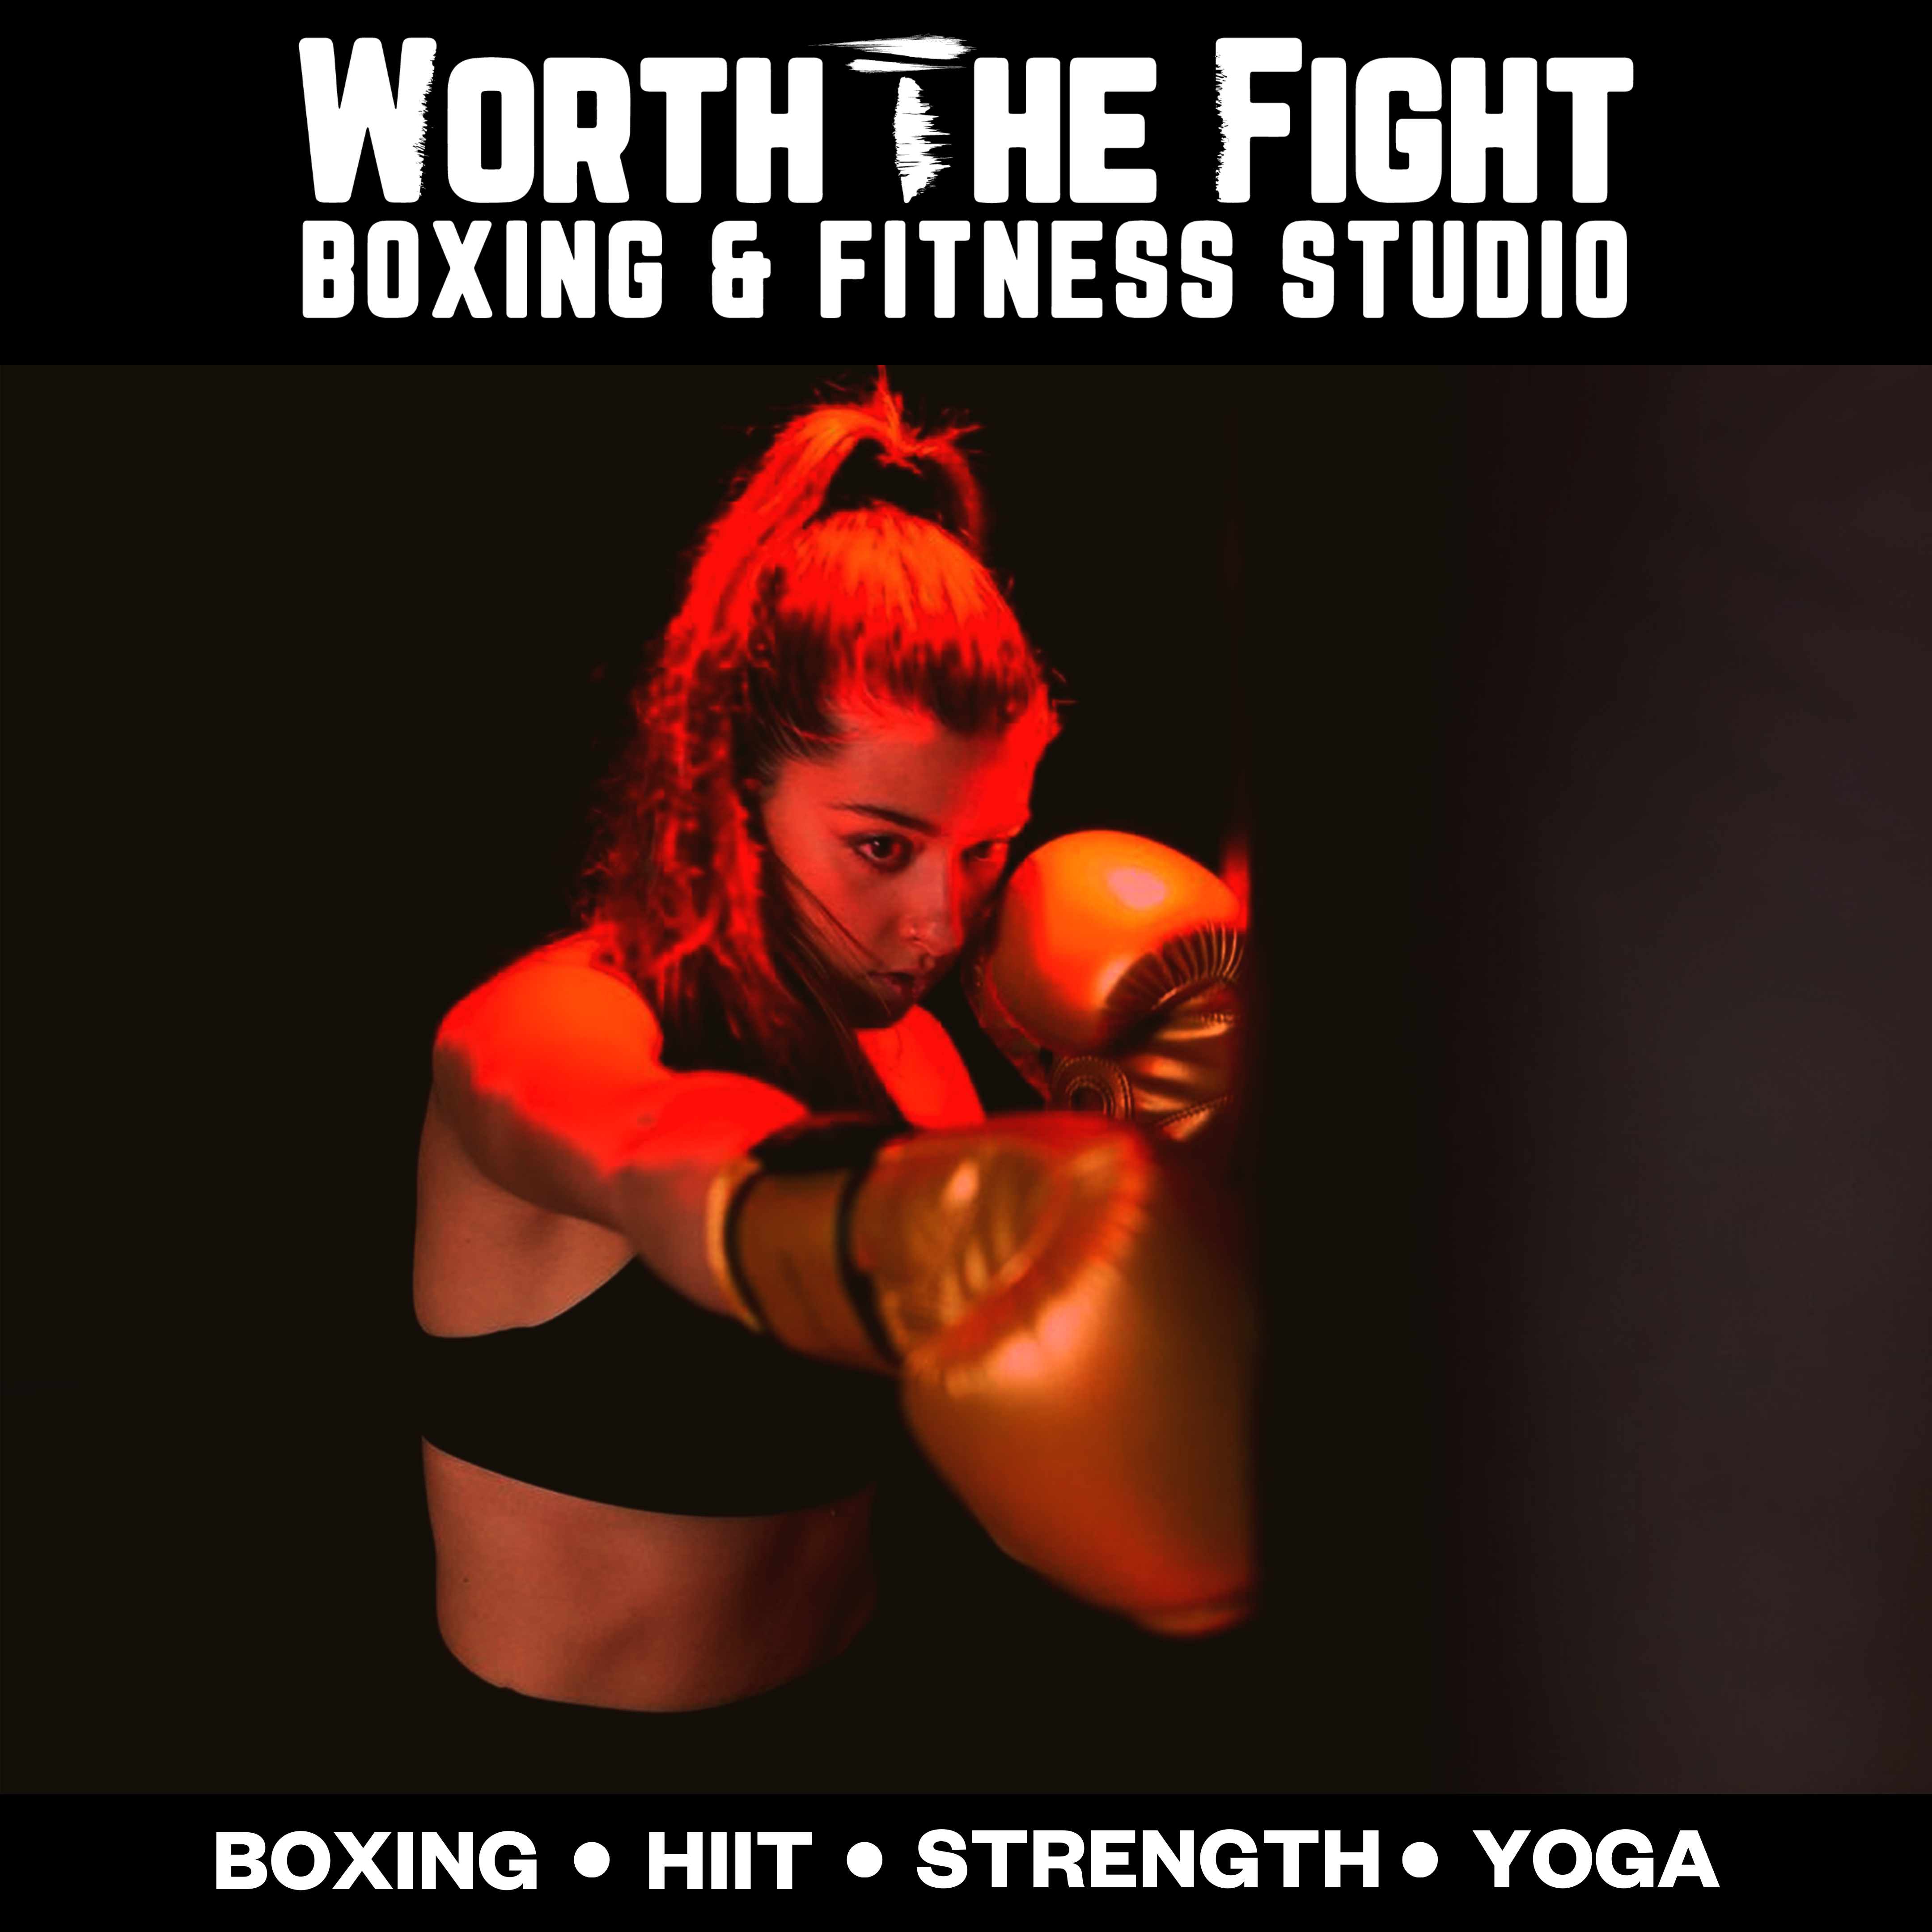 what's the best boxing fitness studio in downtown Denver